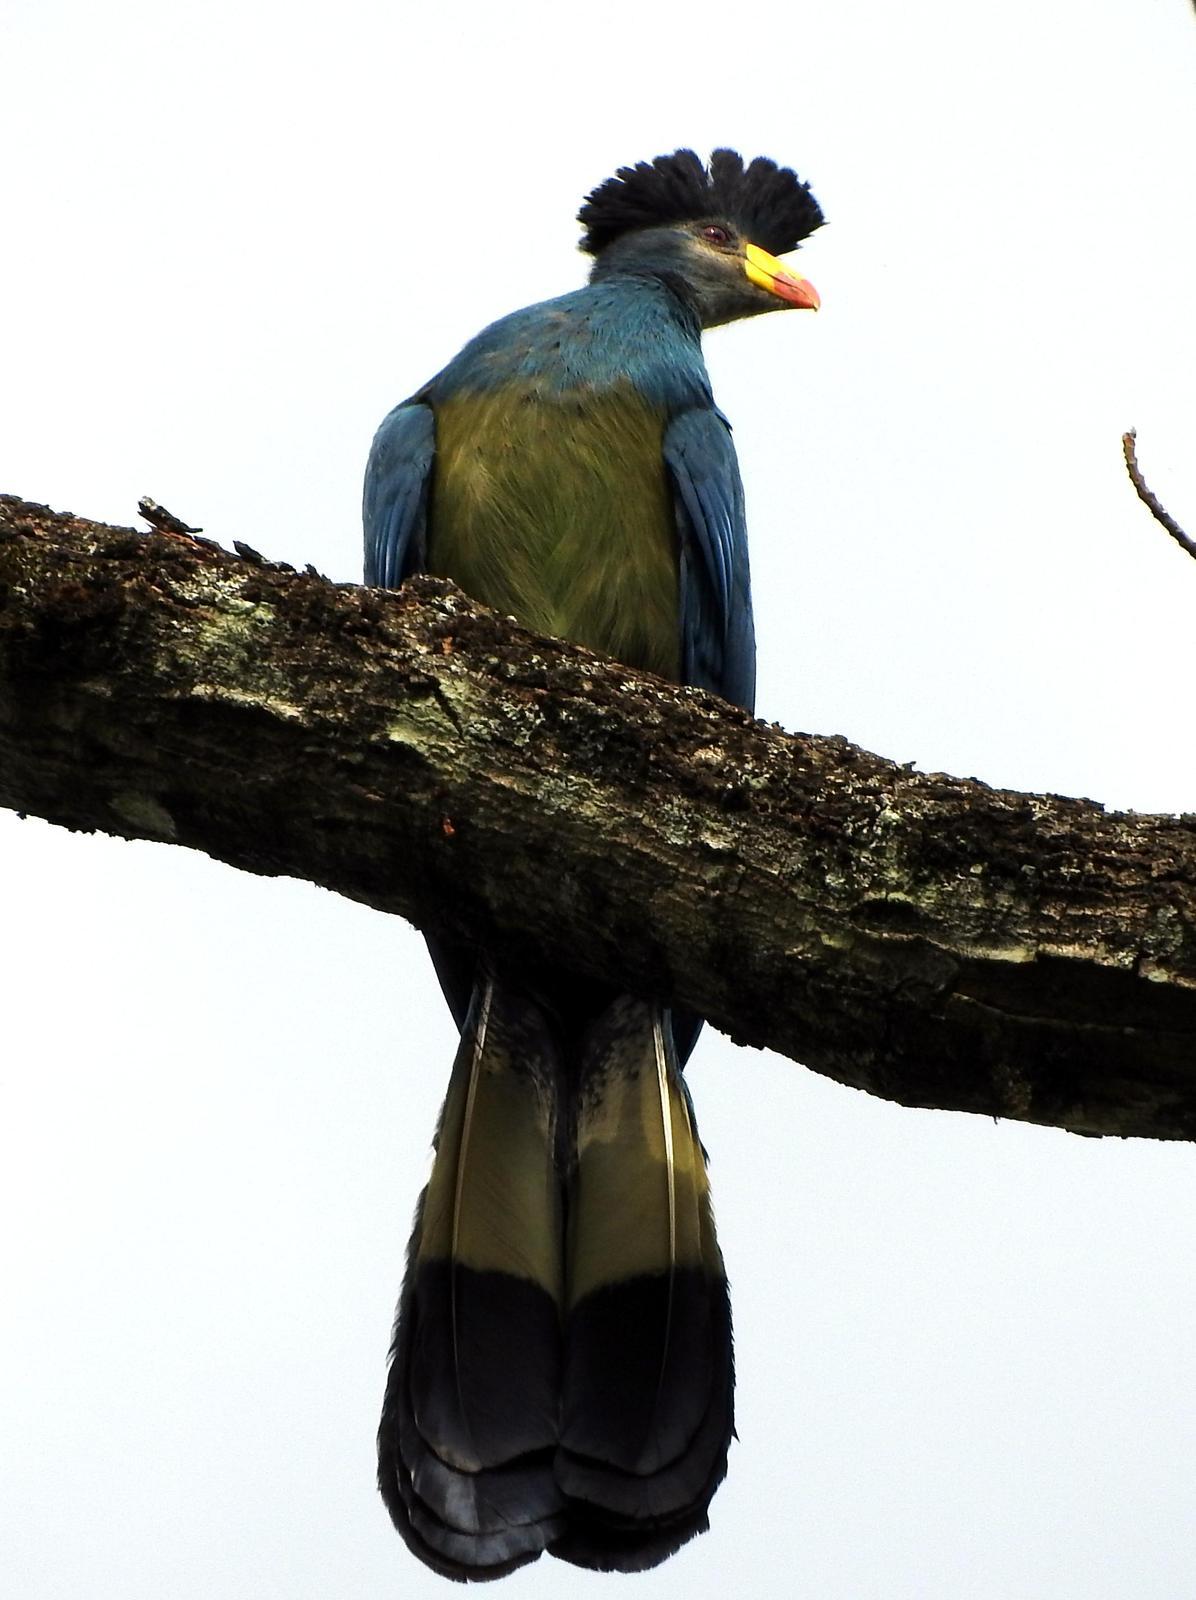 Great Blue Turaco Photo by Todd A. Watkins